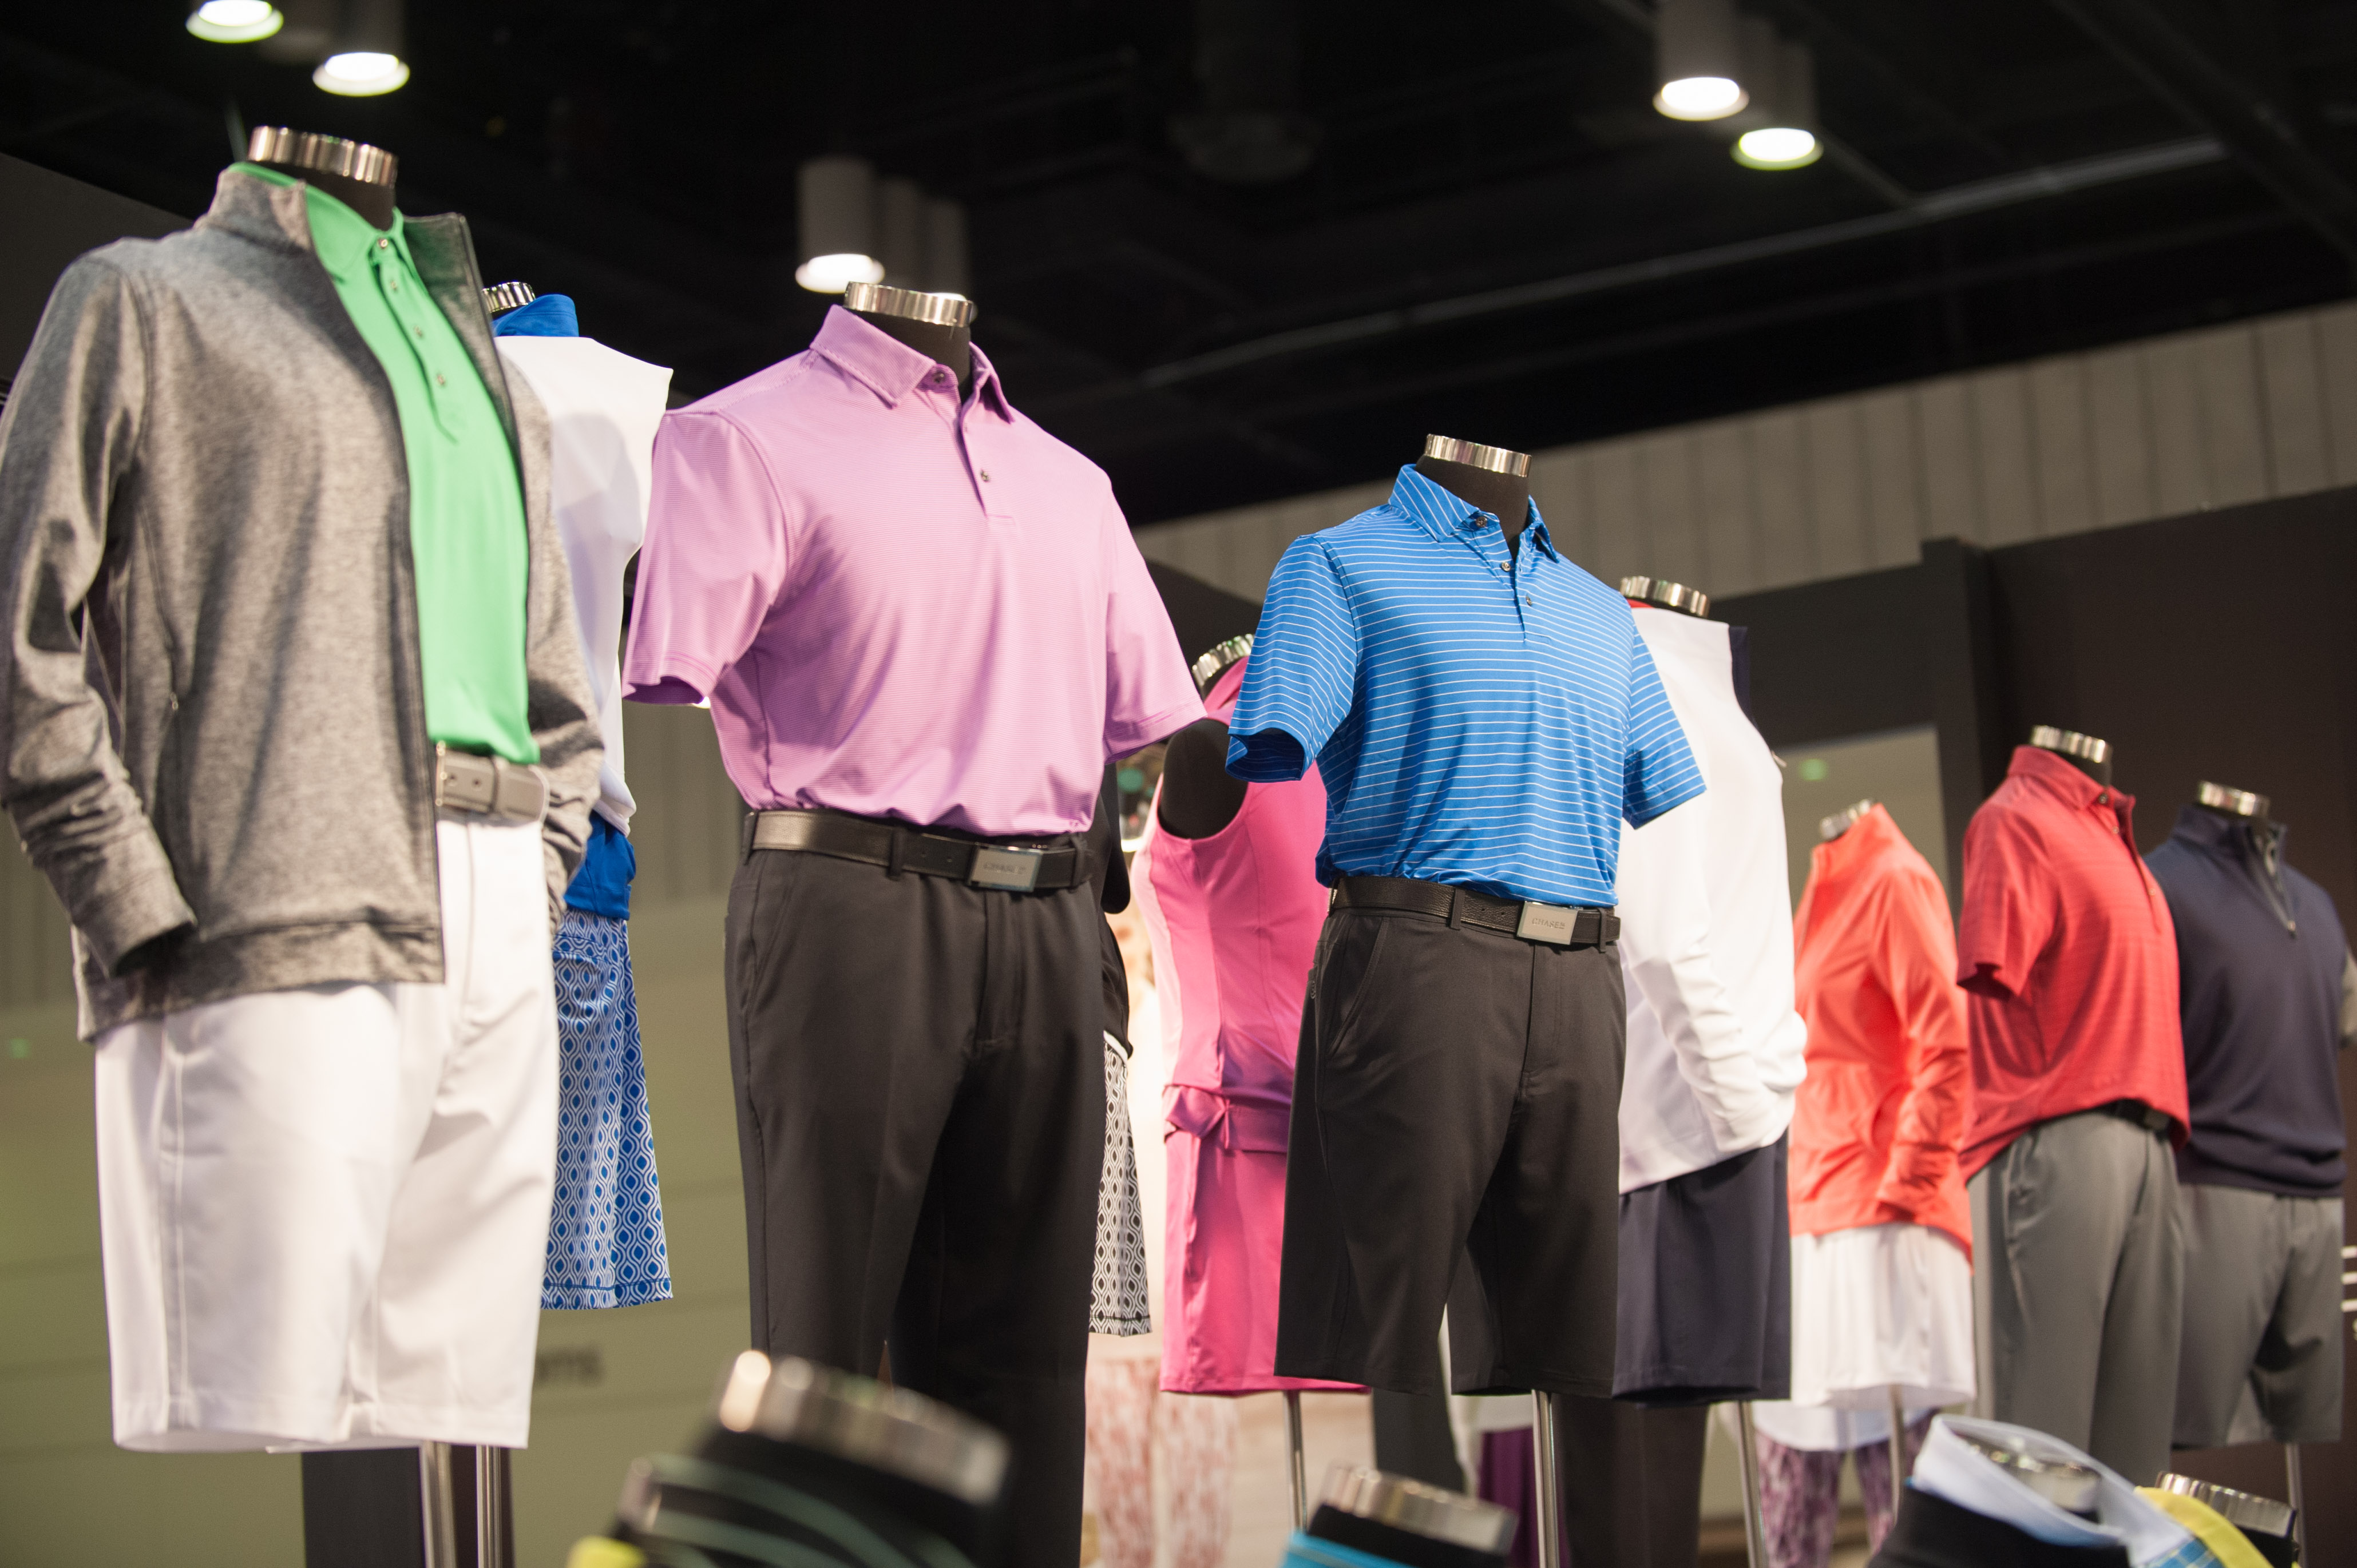 Runway fashion show to feature latest lines at 2018 PGA Merchandise Show